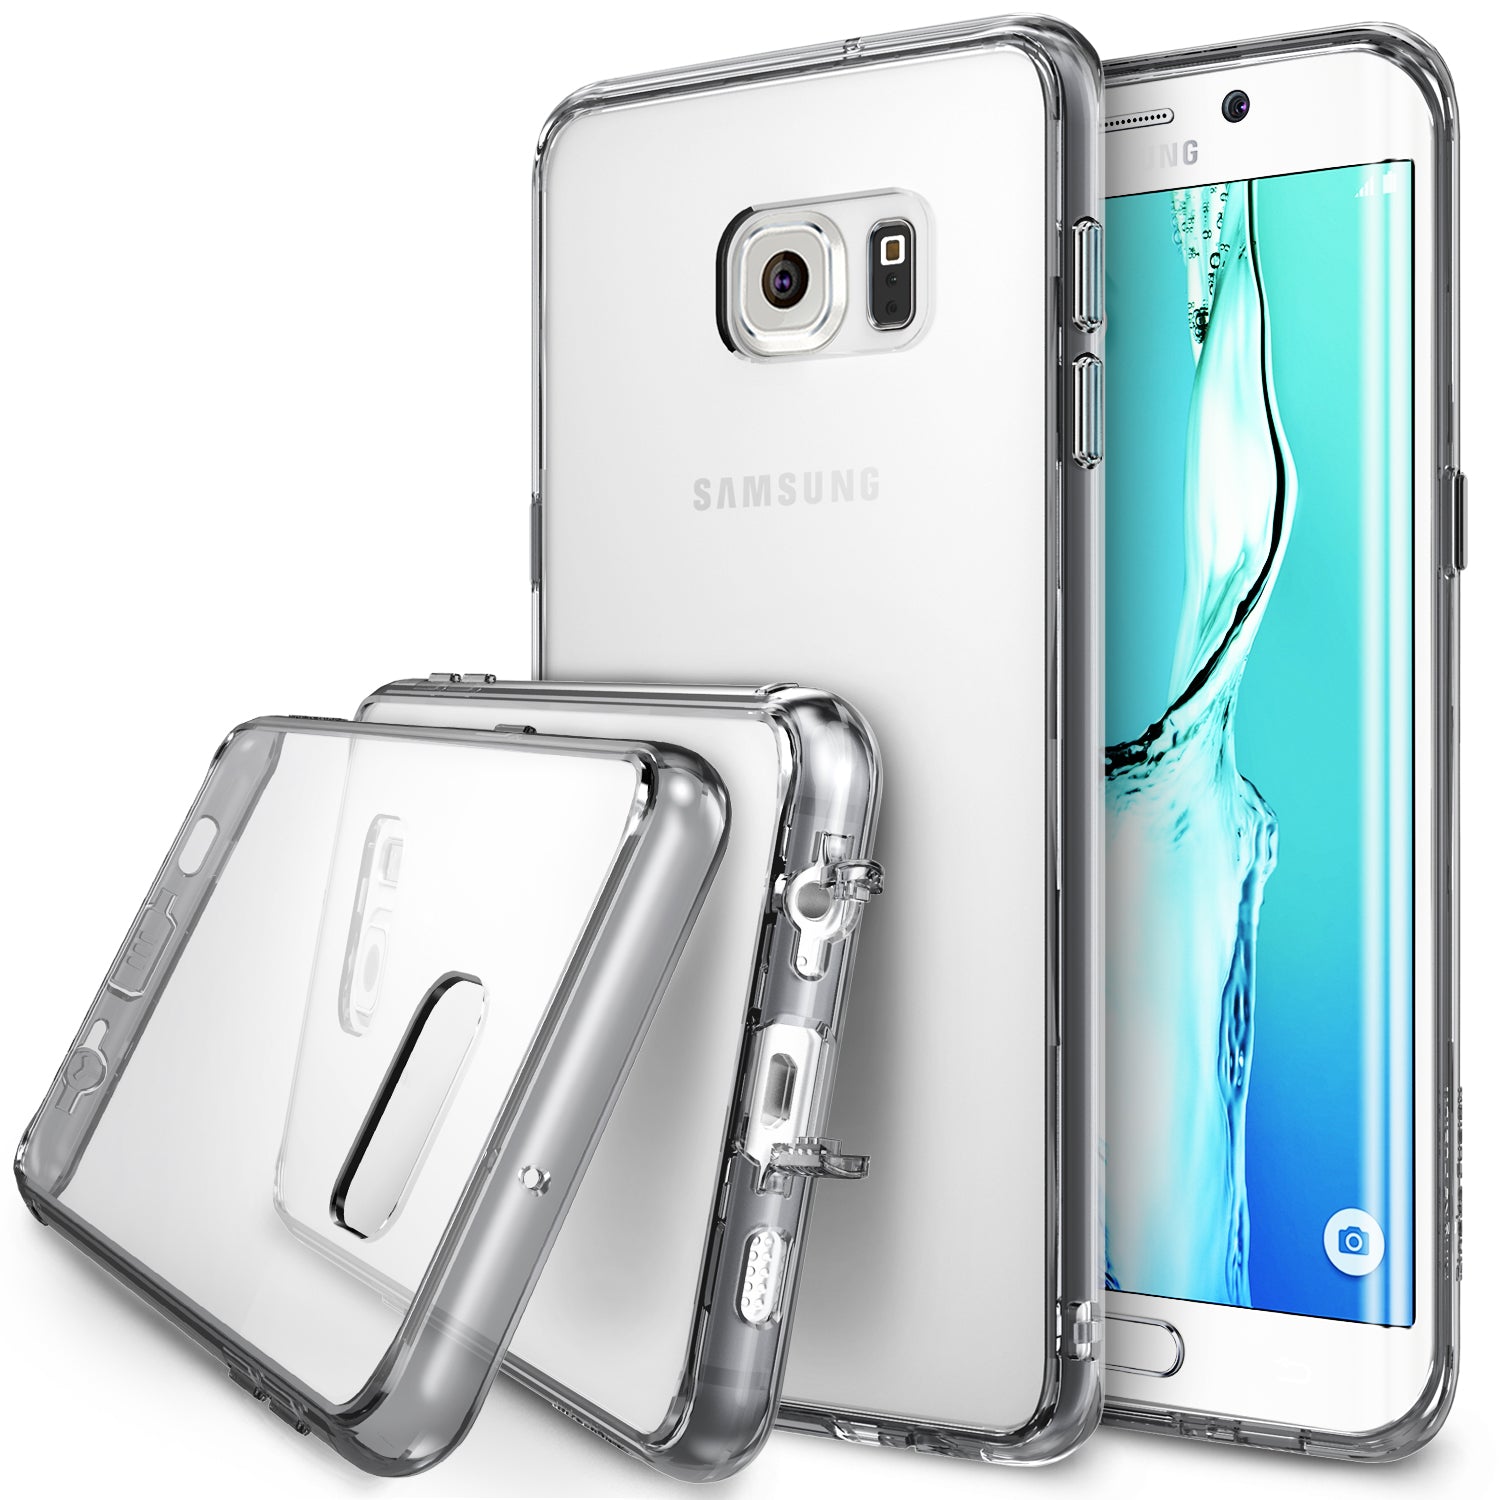 ringke fusion transparent clear hard back cover case for galaxy s6 edge plus smoke black